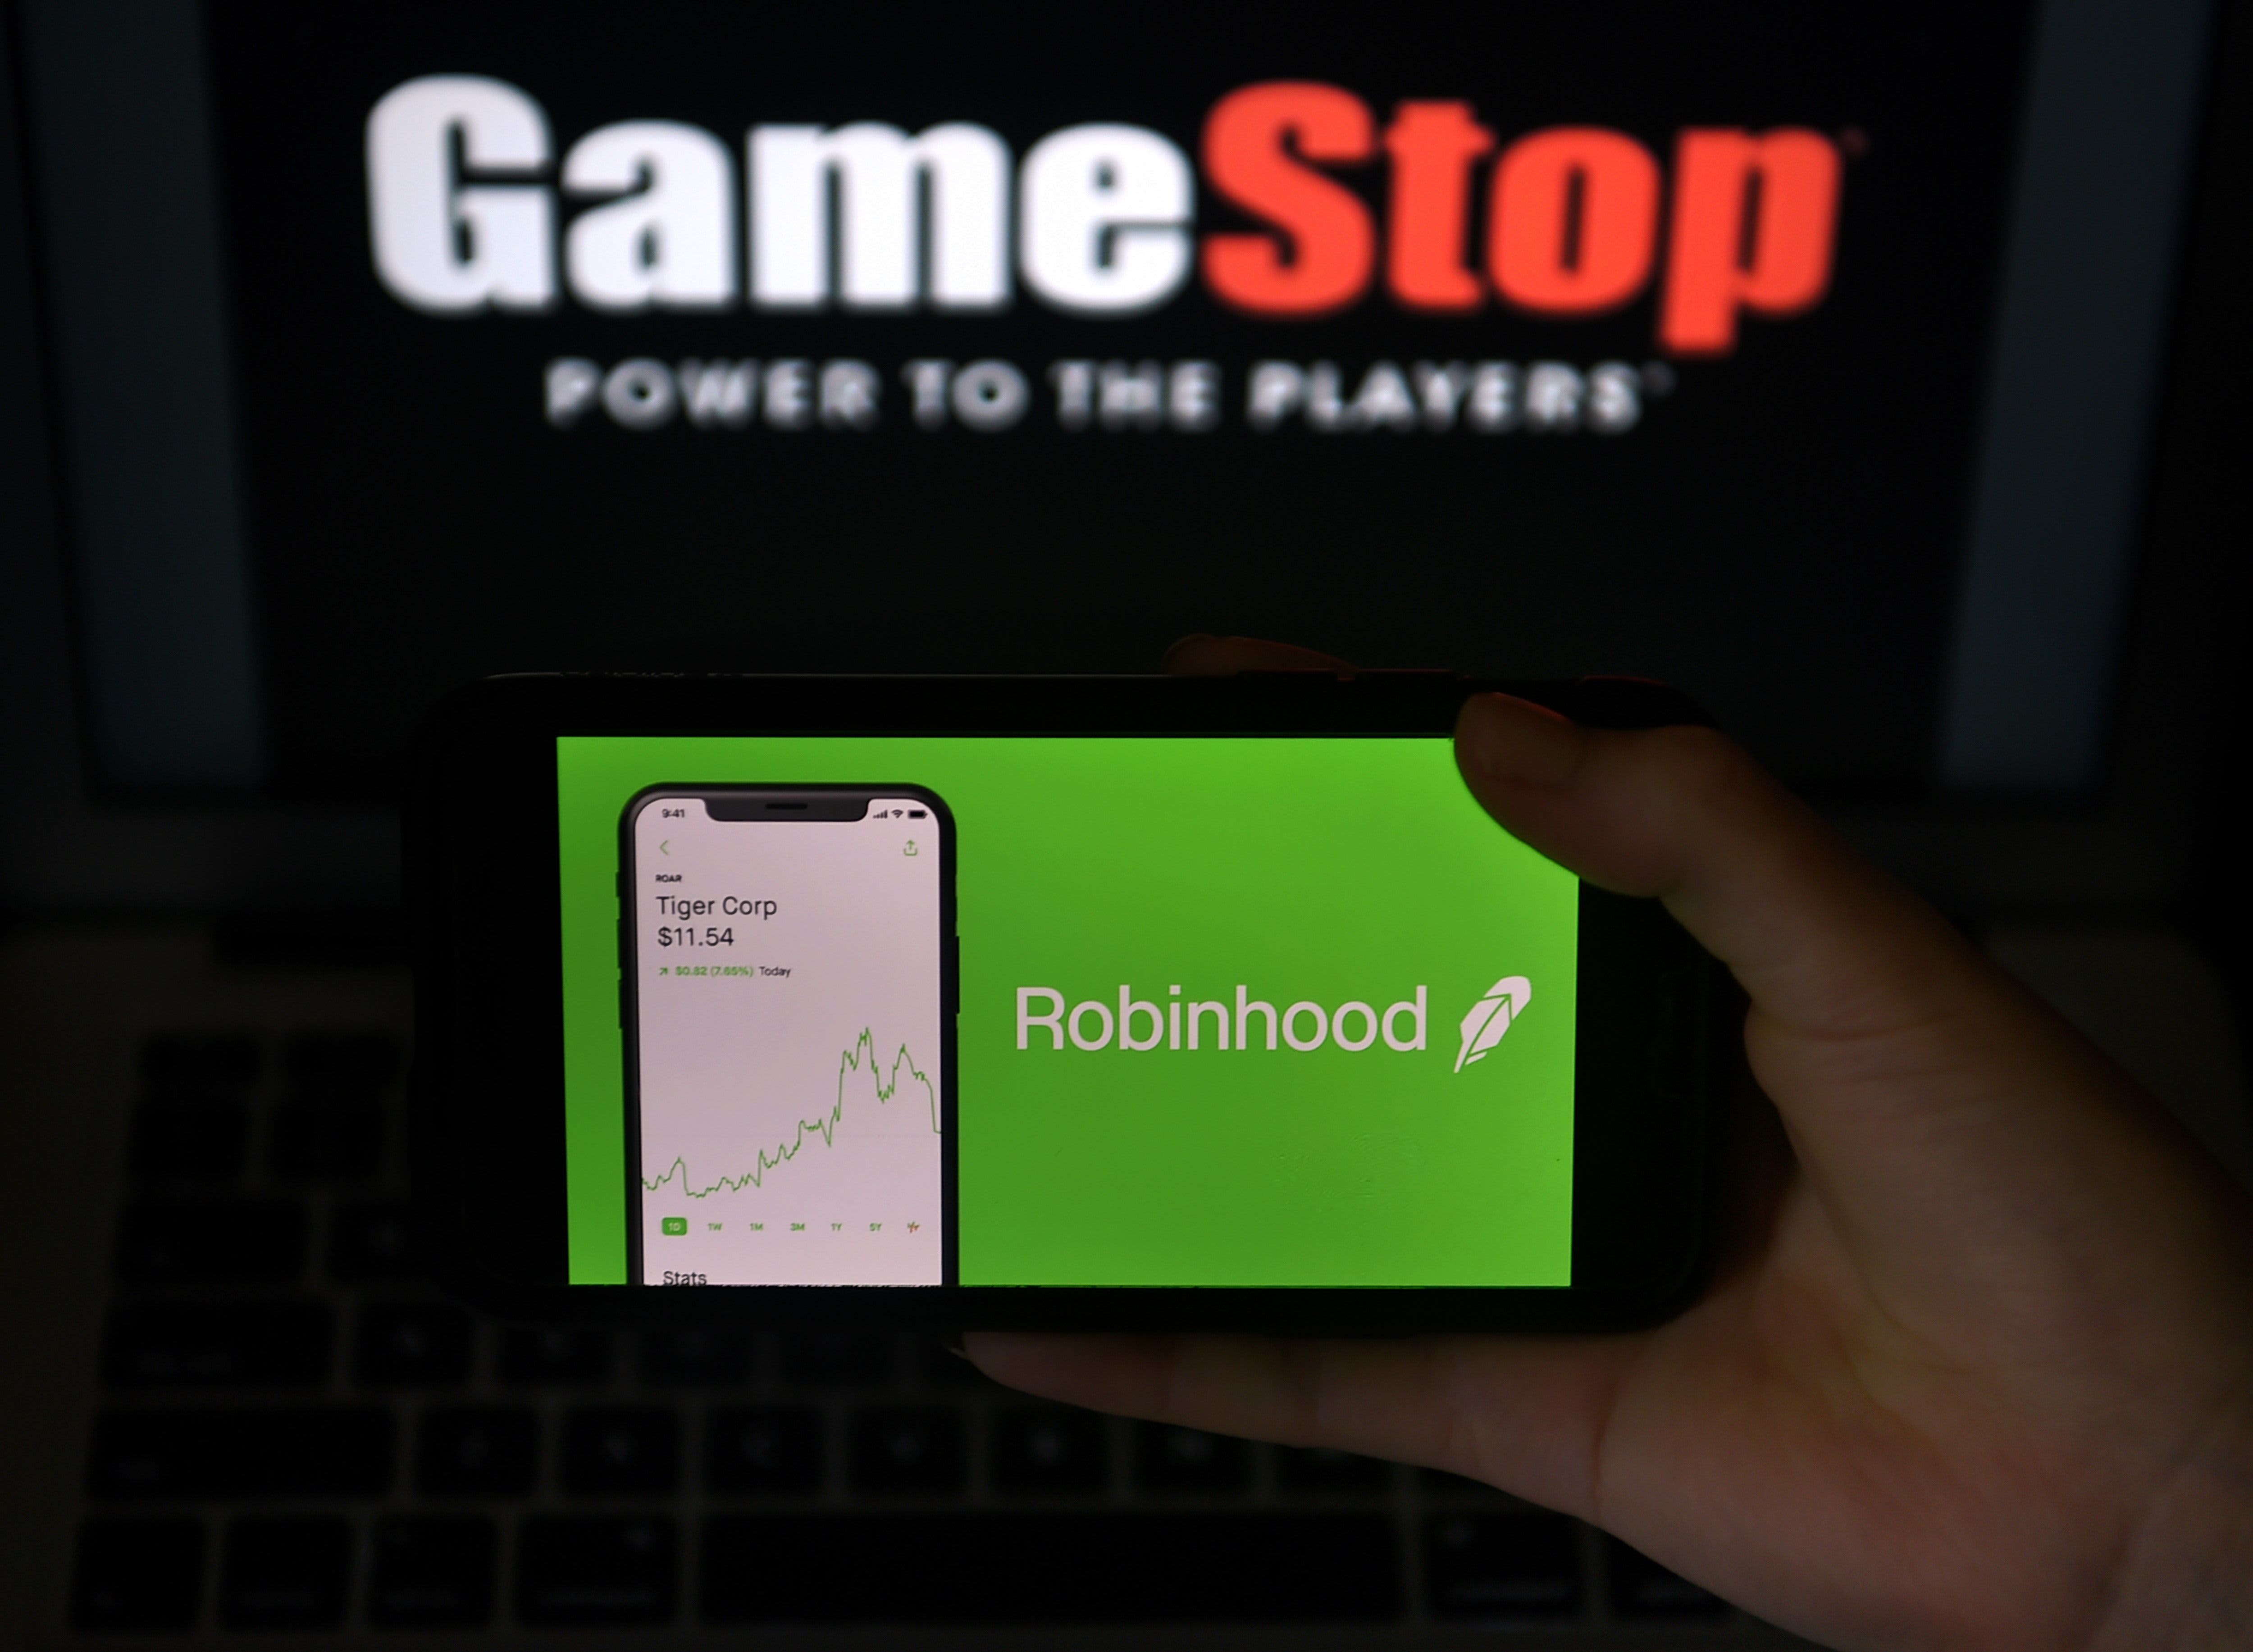 Reddit user who helped inspire GameStop mania says he lost $ 13 million on Tuesday but still holds on